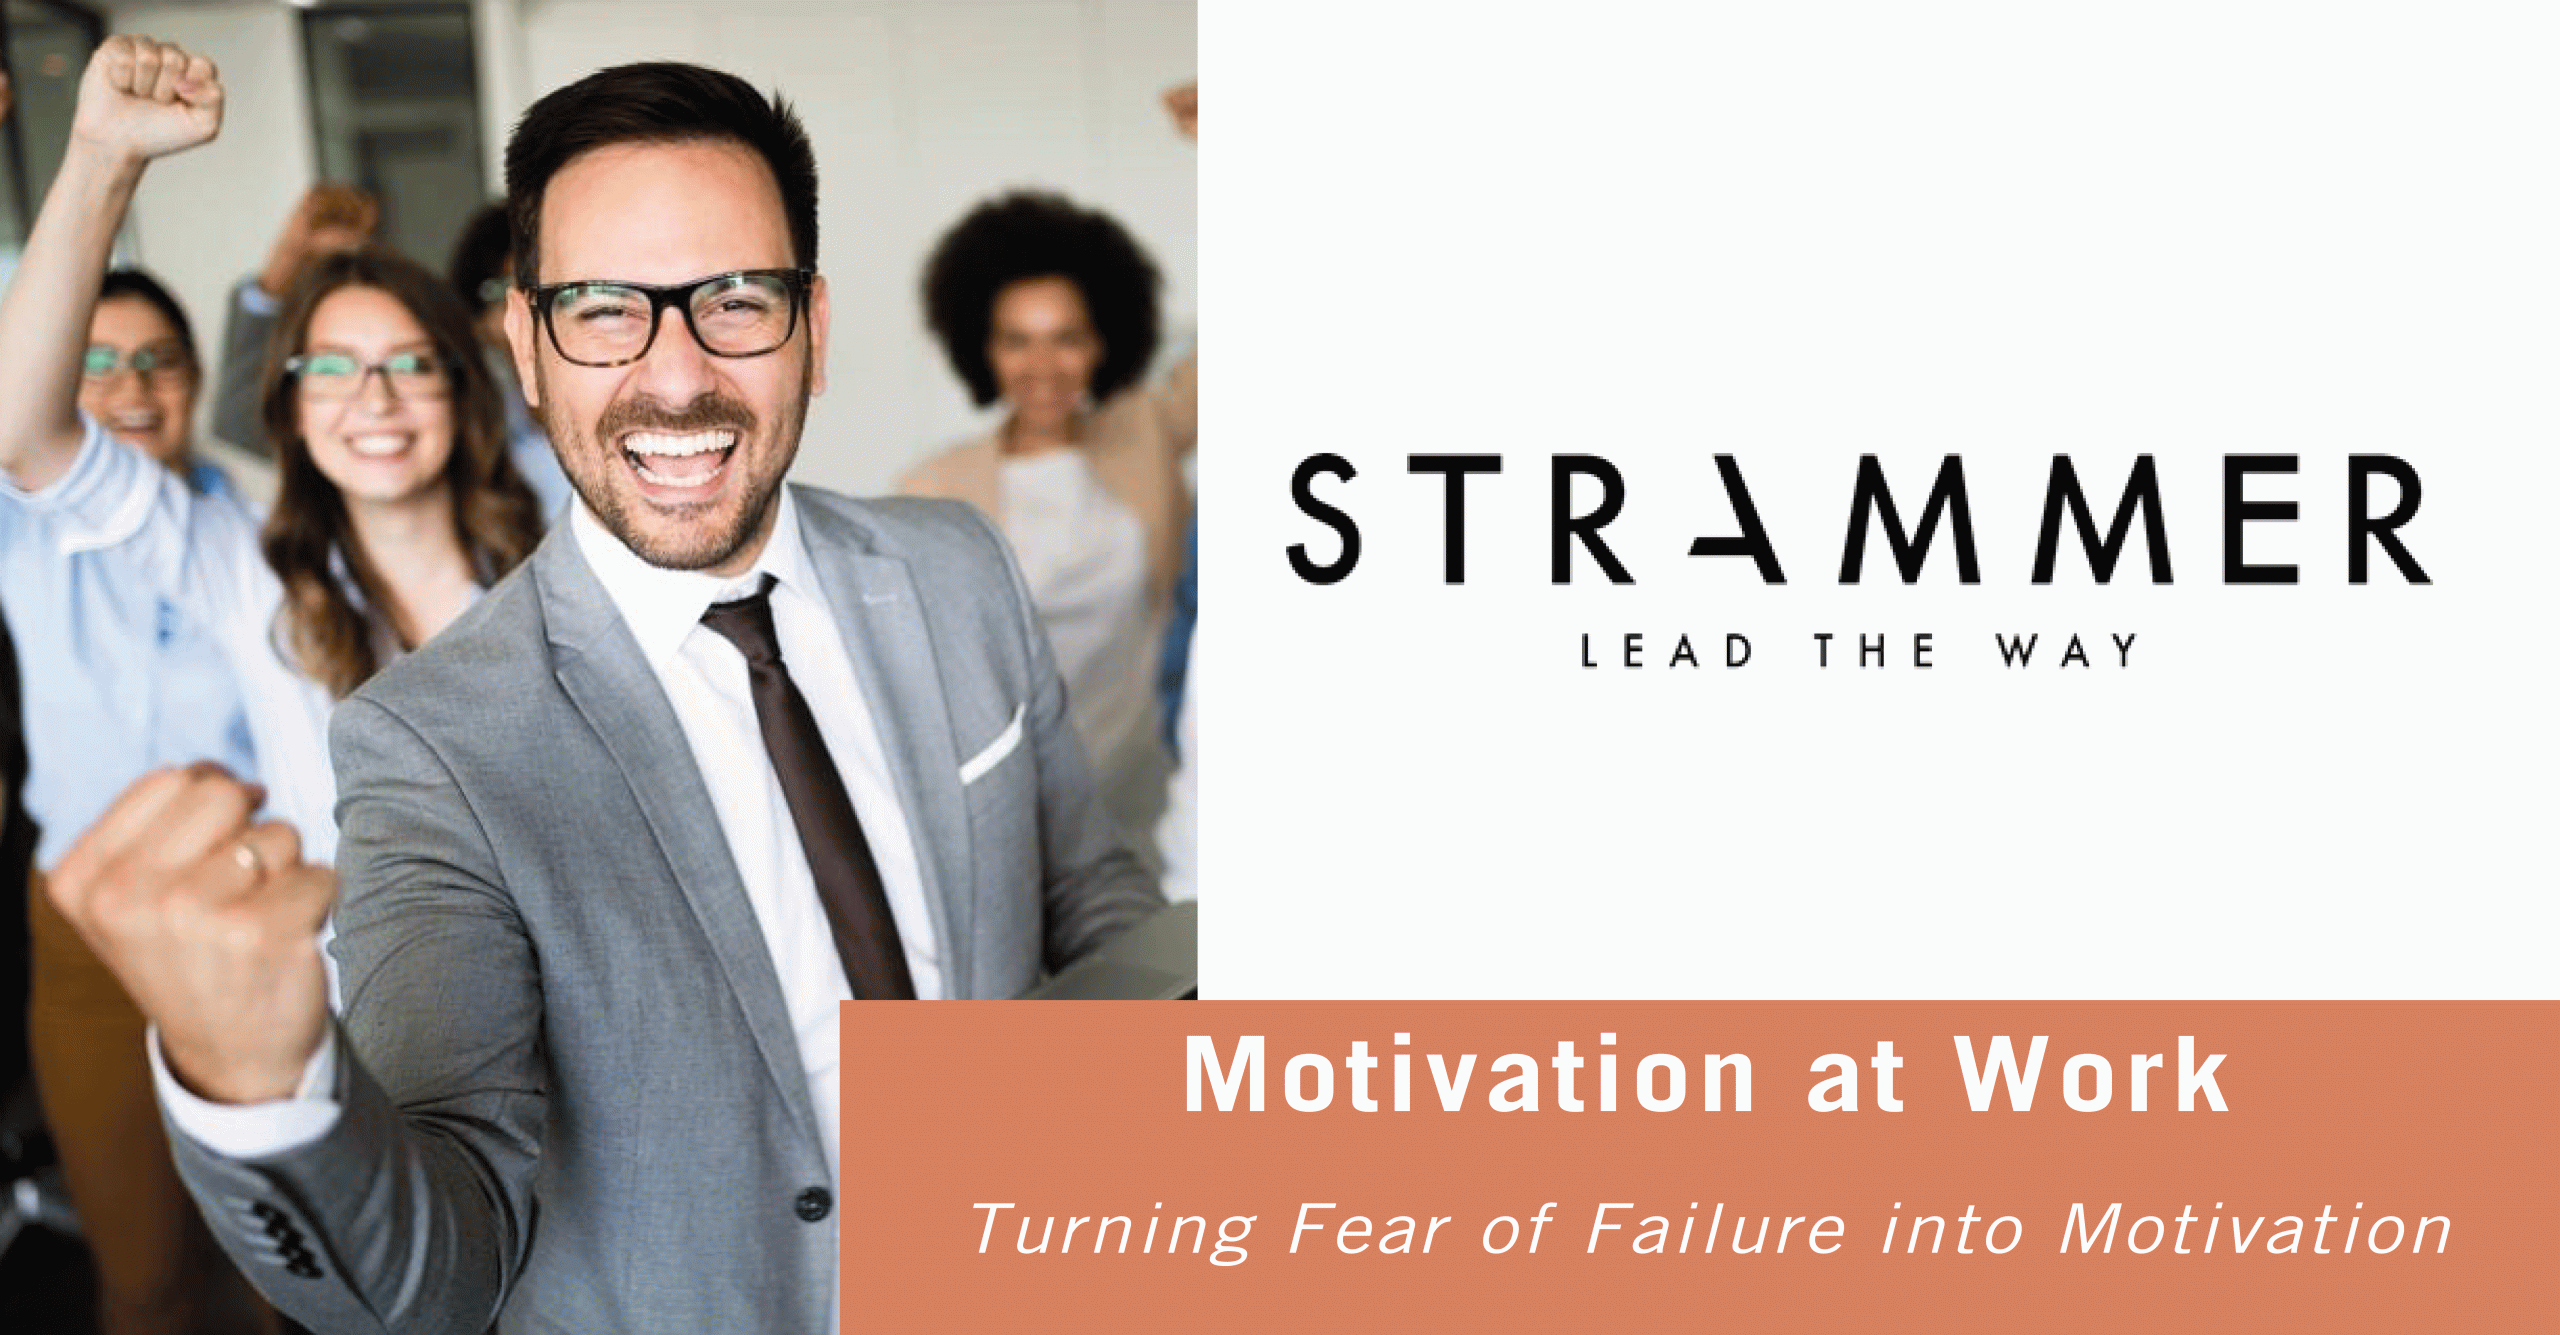 Turning Fear of Failure into Motivation